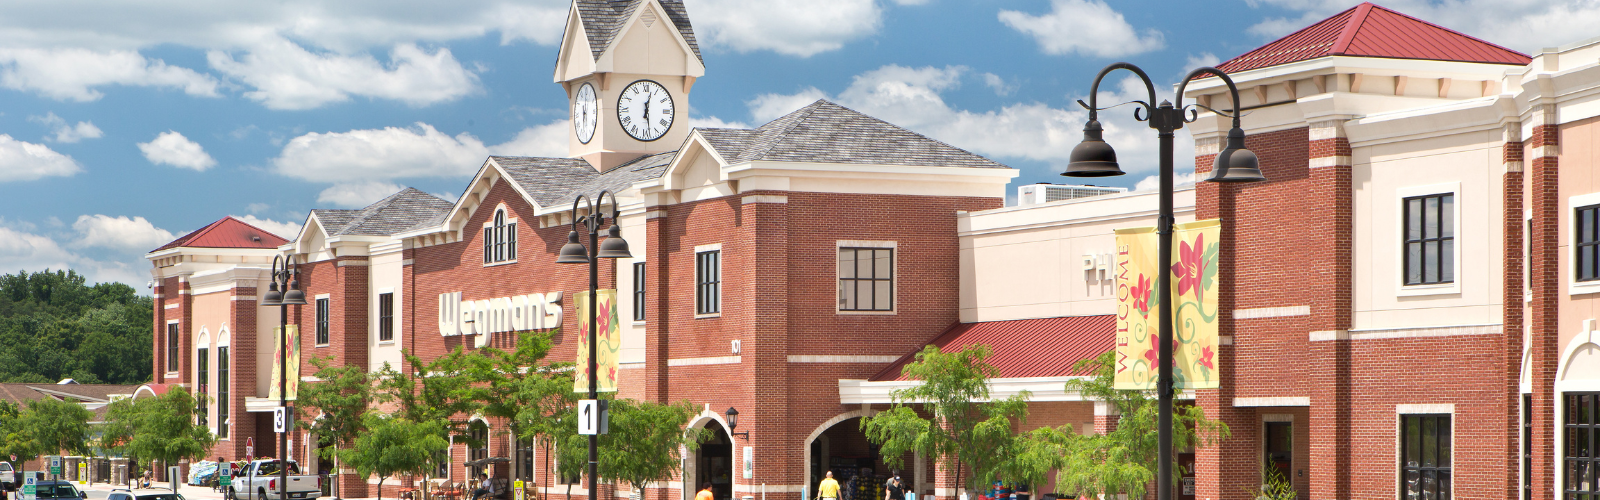 Village at Leesburg: Your Guide to Shopping this Upscale Center